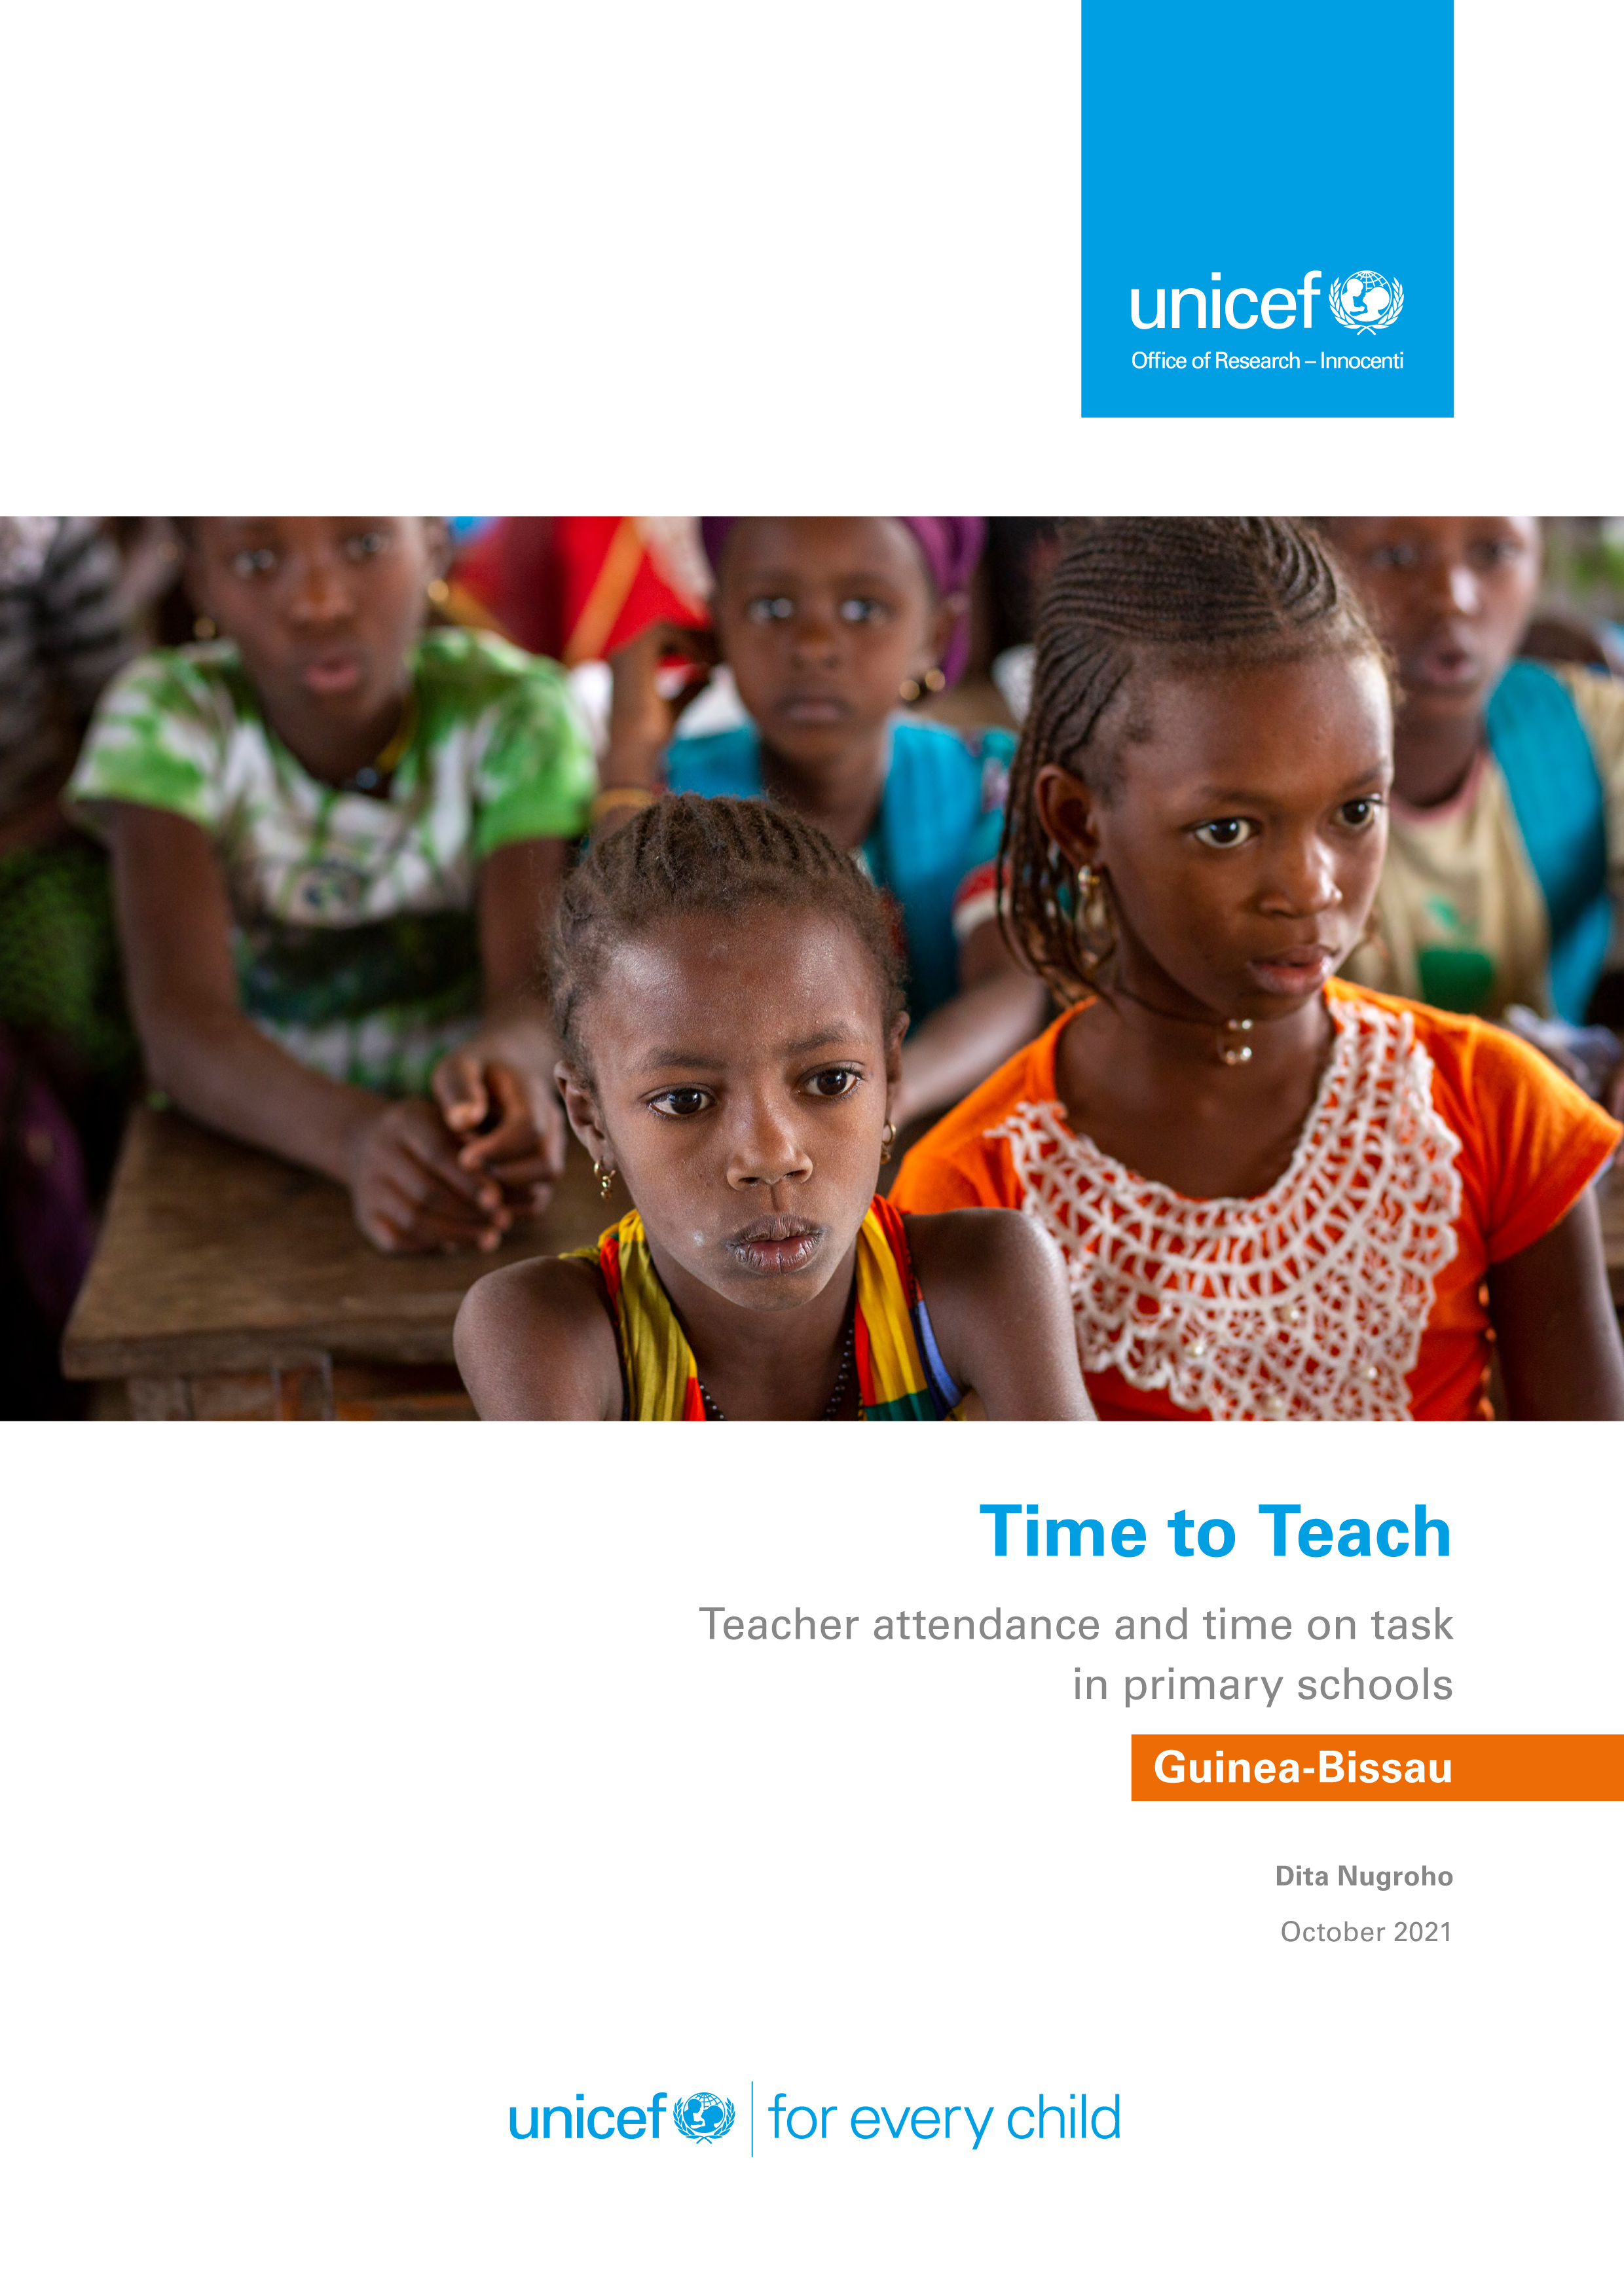 image of Time to Teach: Teacher Attendance and Time on Task in Primary Schools in Guinea-Bissau